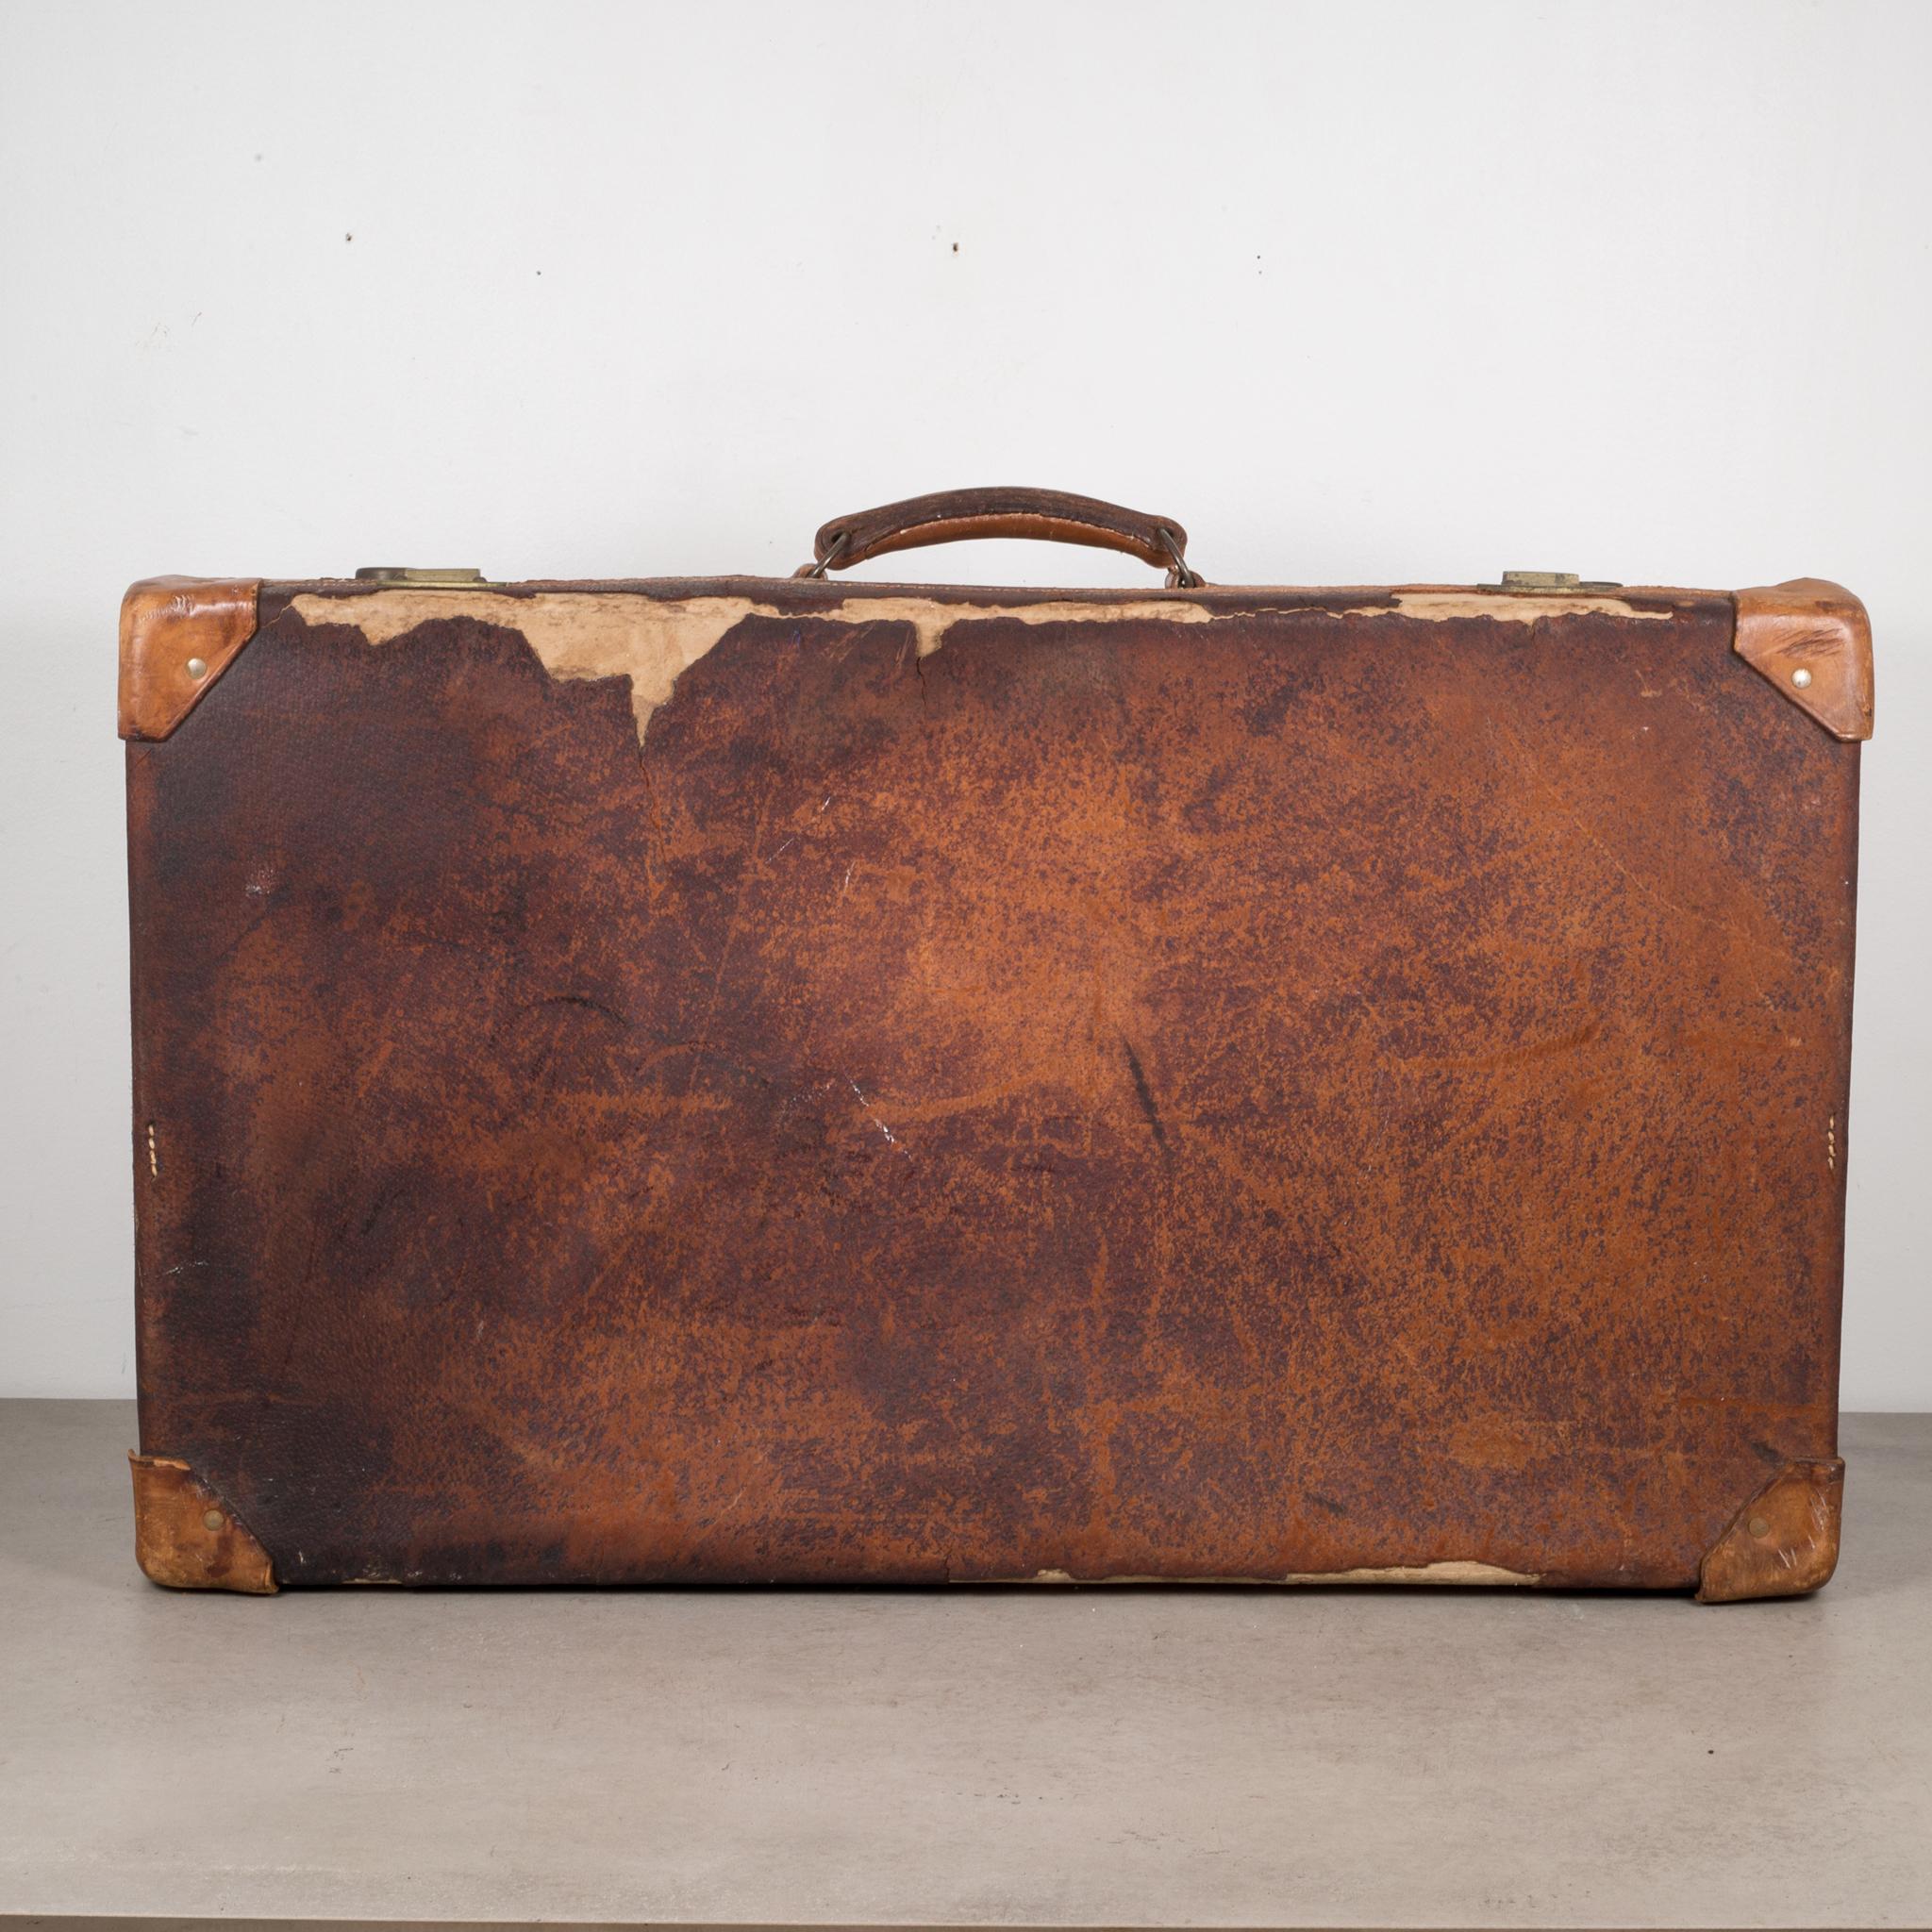 About

A distressed leather suitcase with leather handle, fabric interior and brass locks. Key is missing.

Creator: Unknown.
Date of manufacture: circa 1940.
Materials and techniques: Leather, Brass.
Condition: Distressed. Wear consistent with age